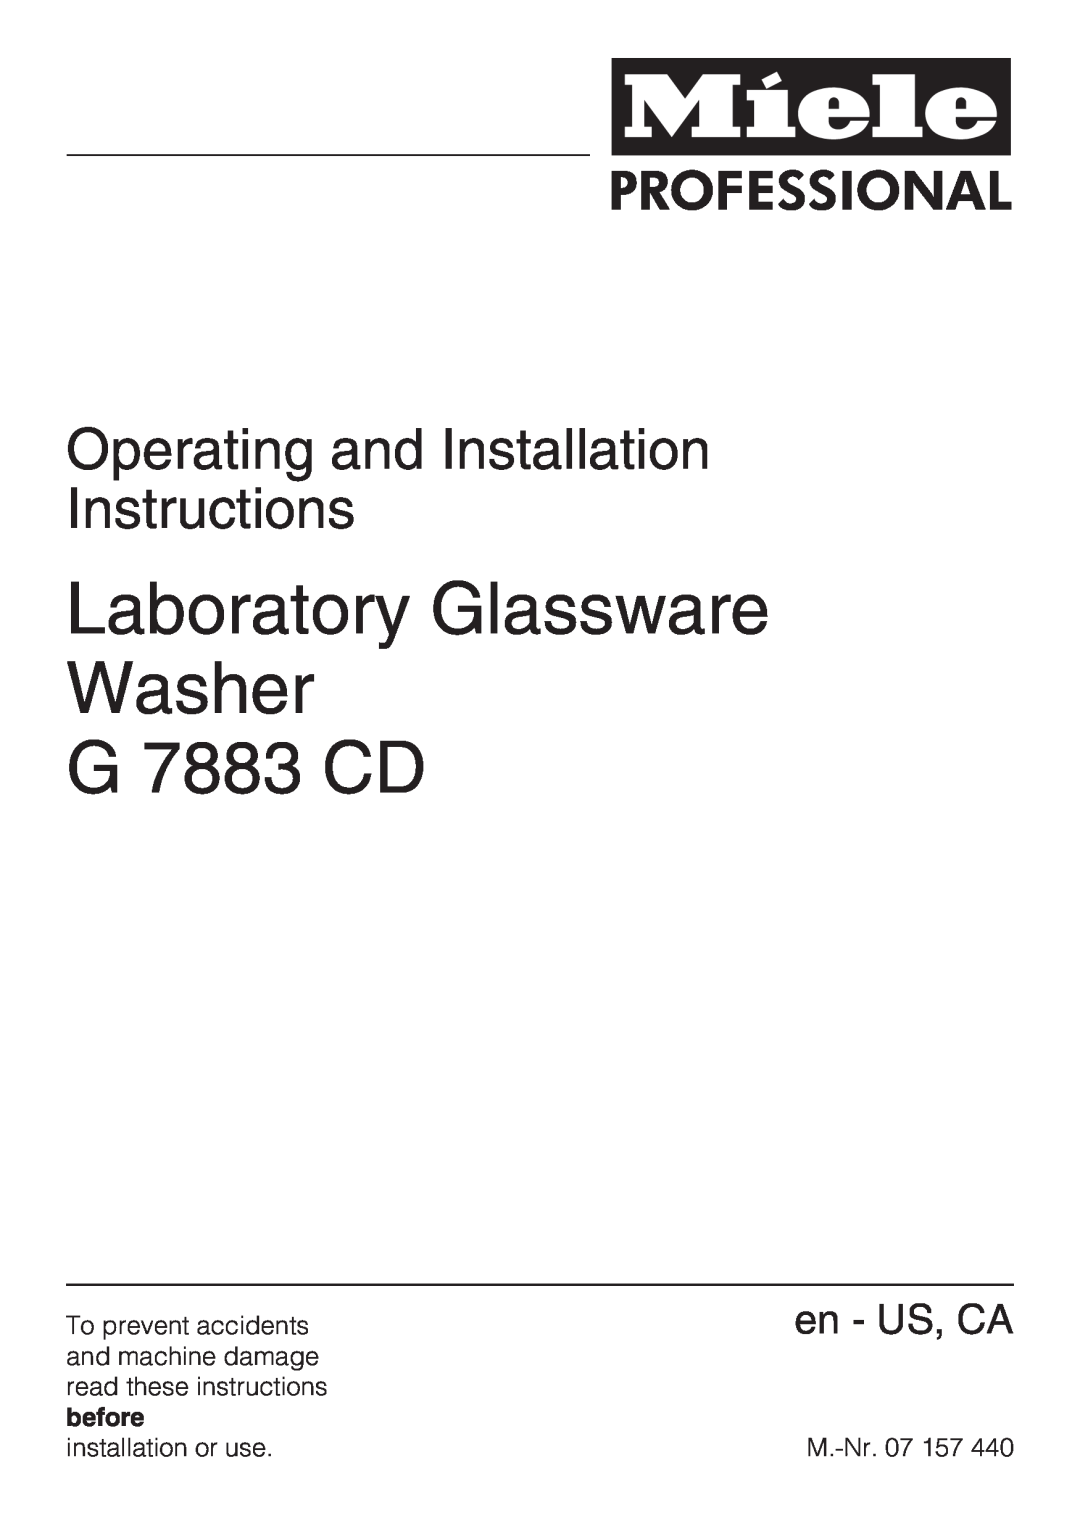 Miele installation instructions Operating and Installation Instructions, Laboratory Glassware Washer G 7883 CD 